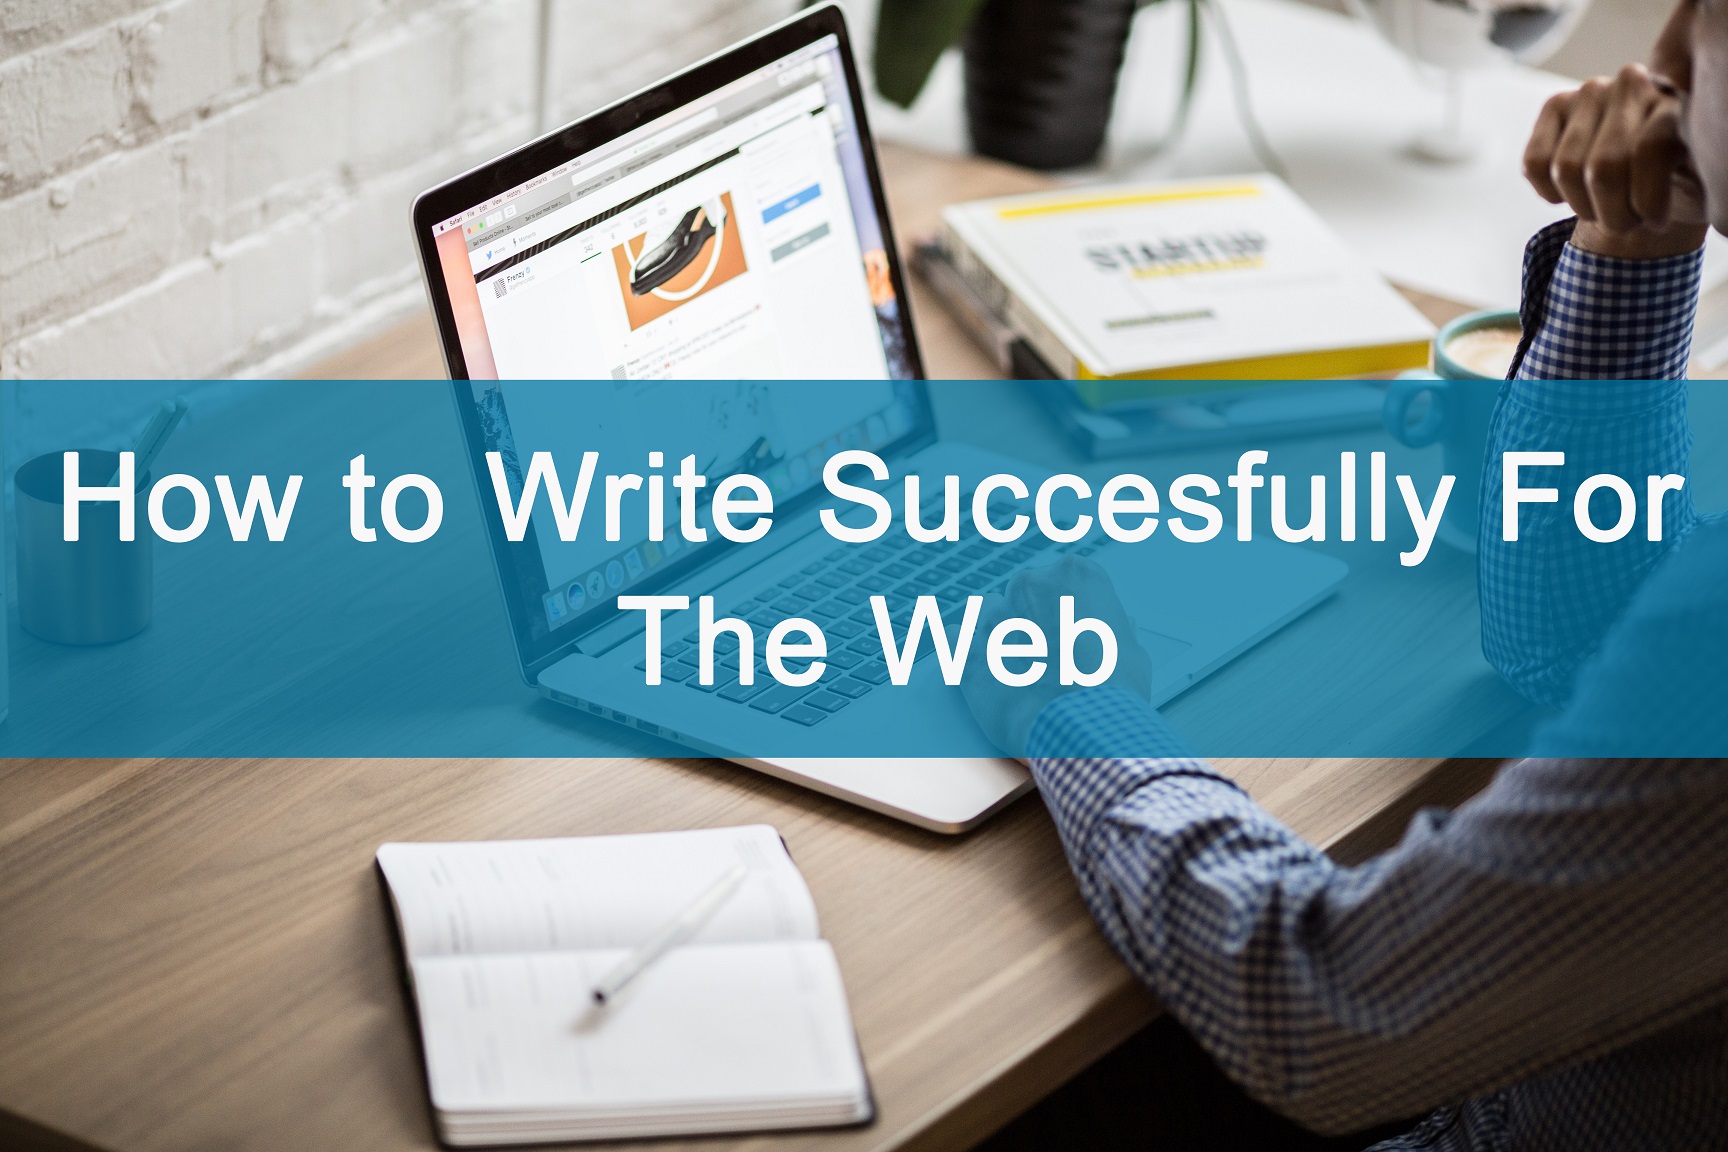 How to write succesfully for the web